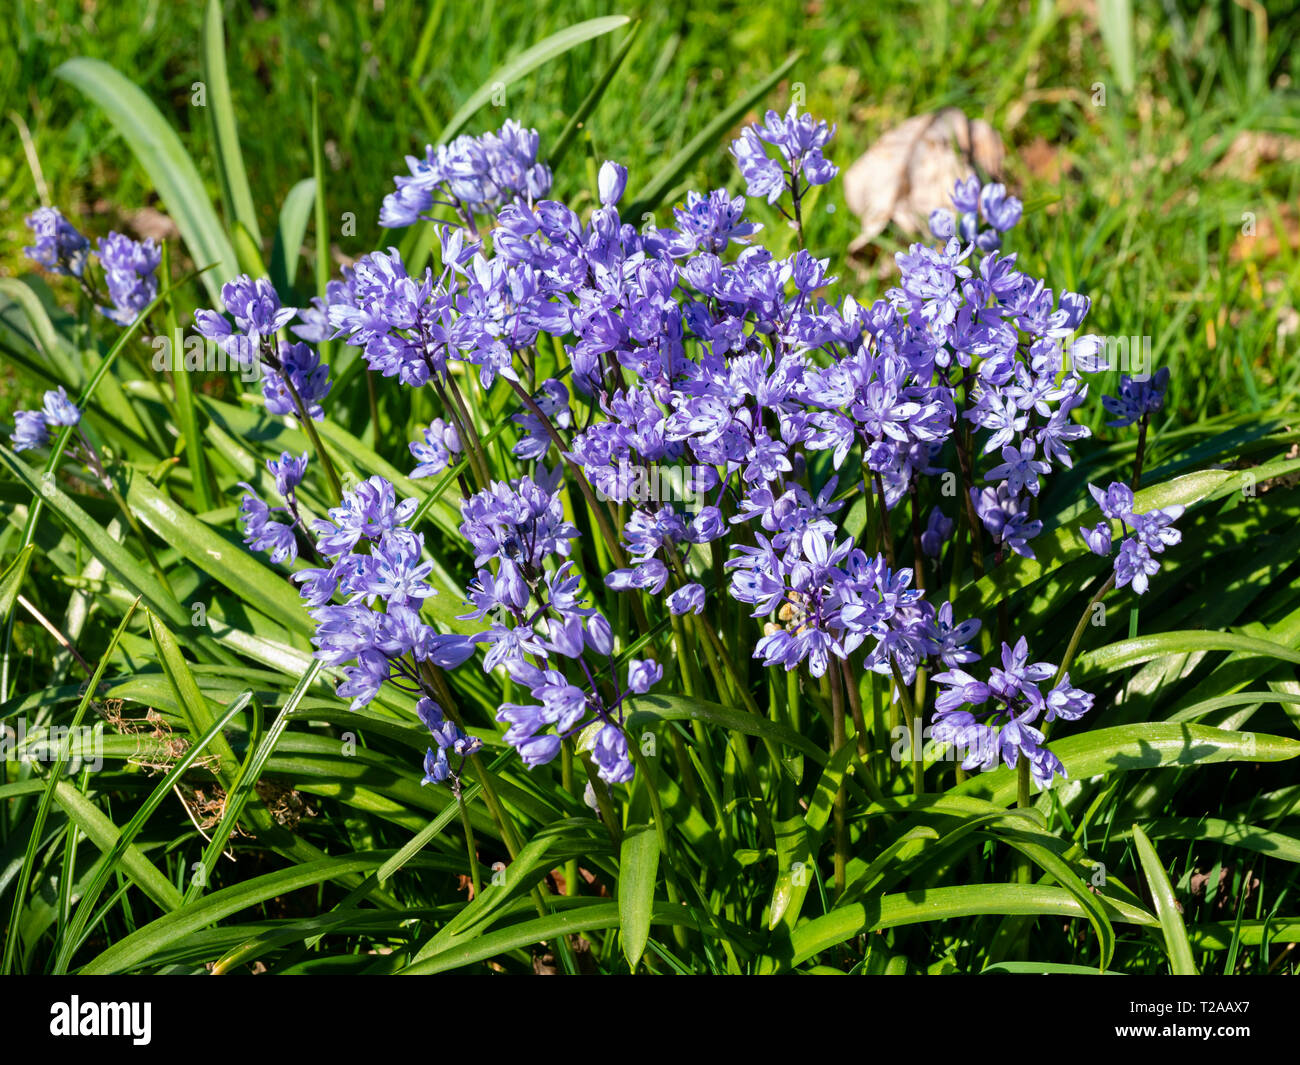 Massed spring flowers of the bulbous Turkish squill, Scilla bithynica, naturalised in grass Stock Photo